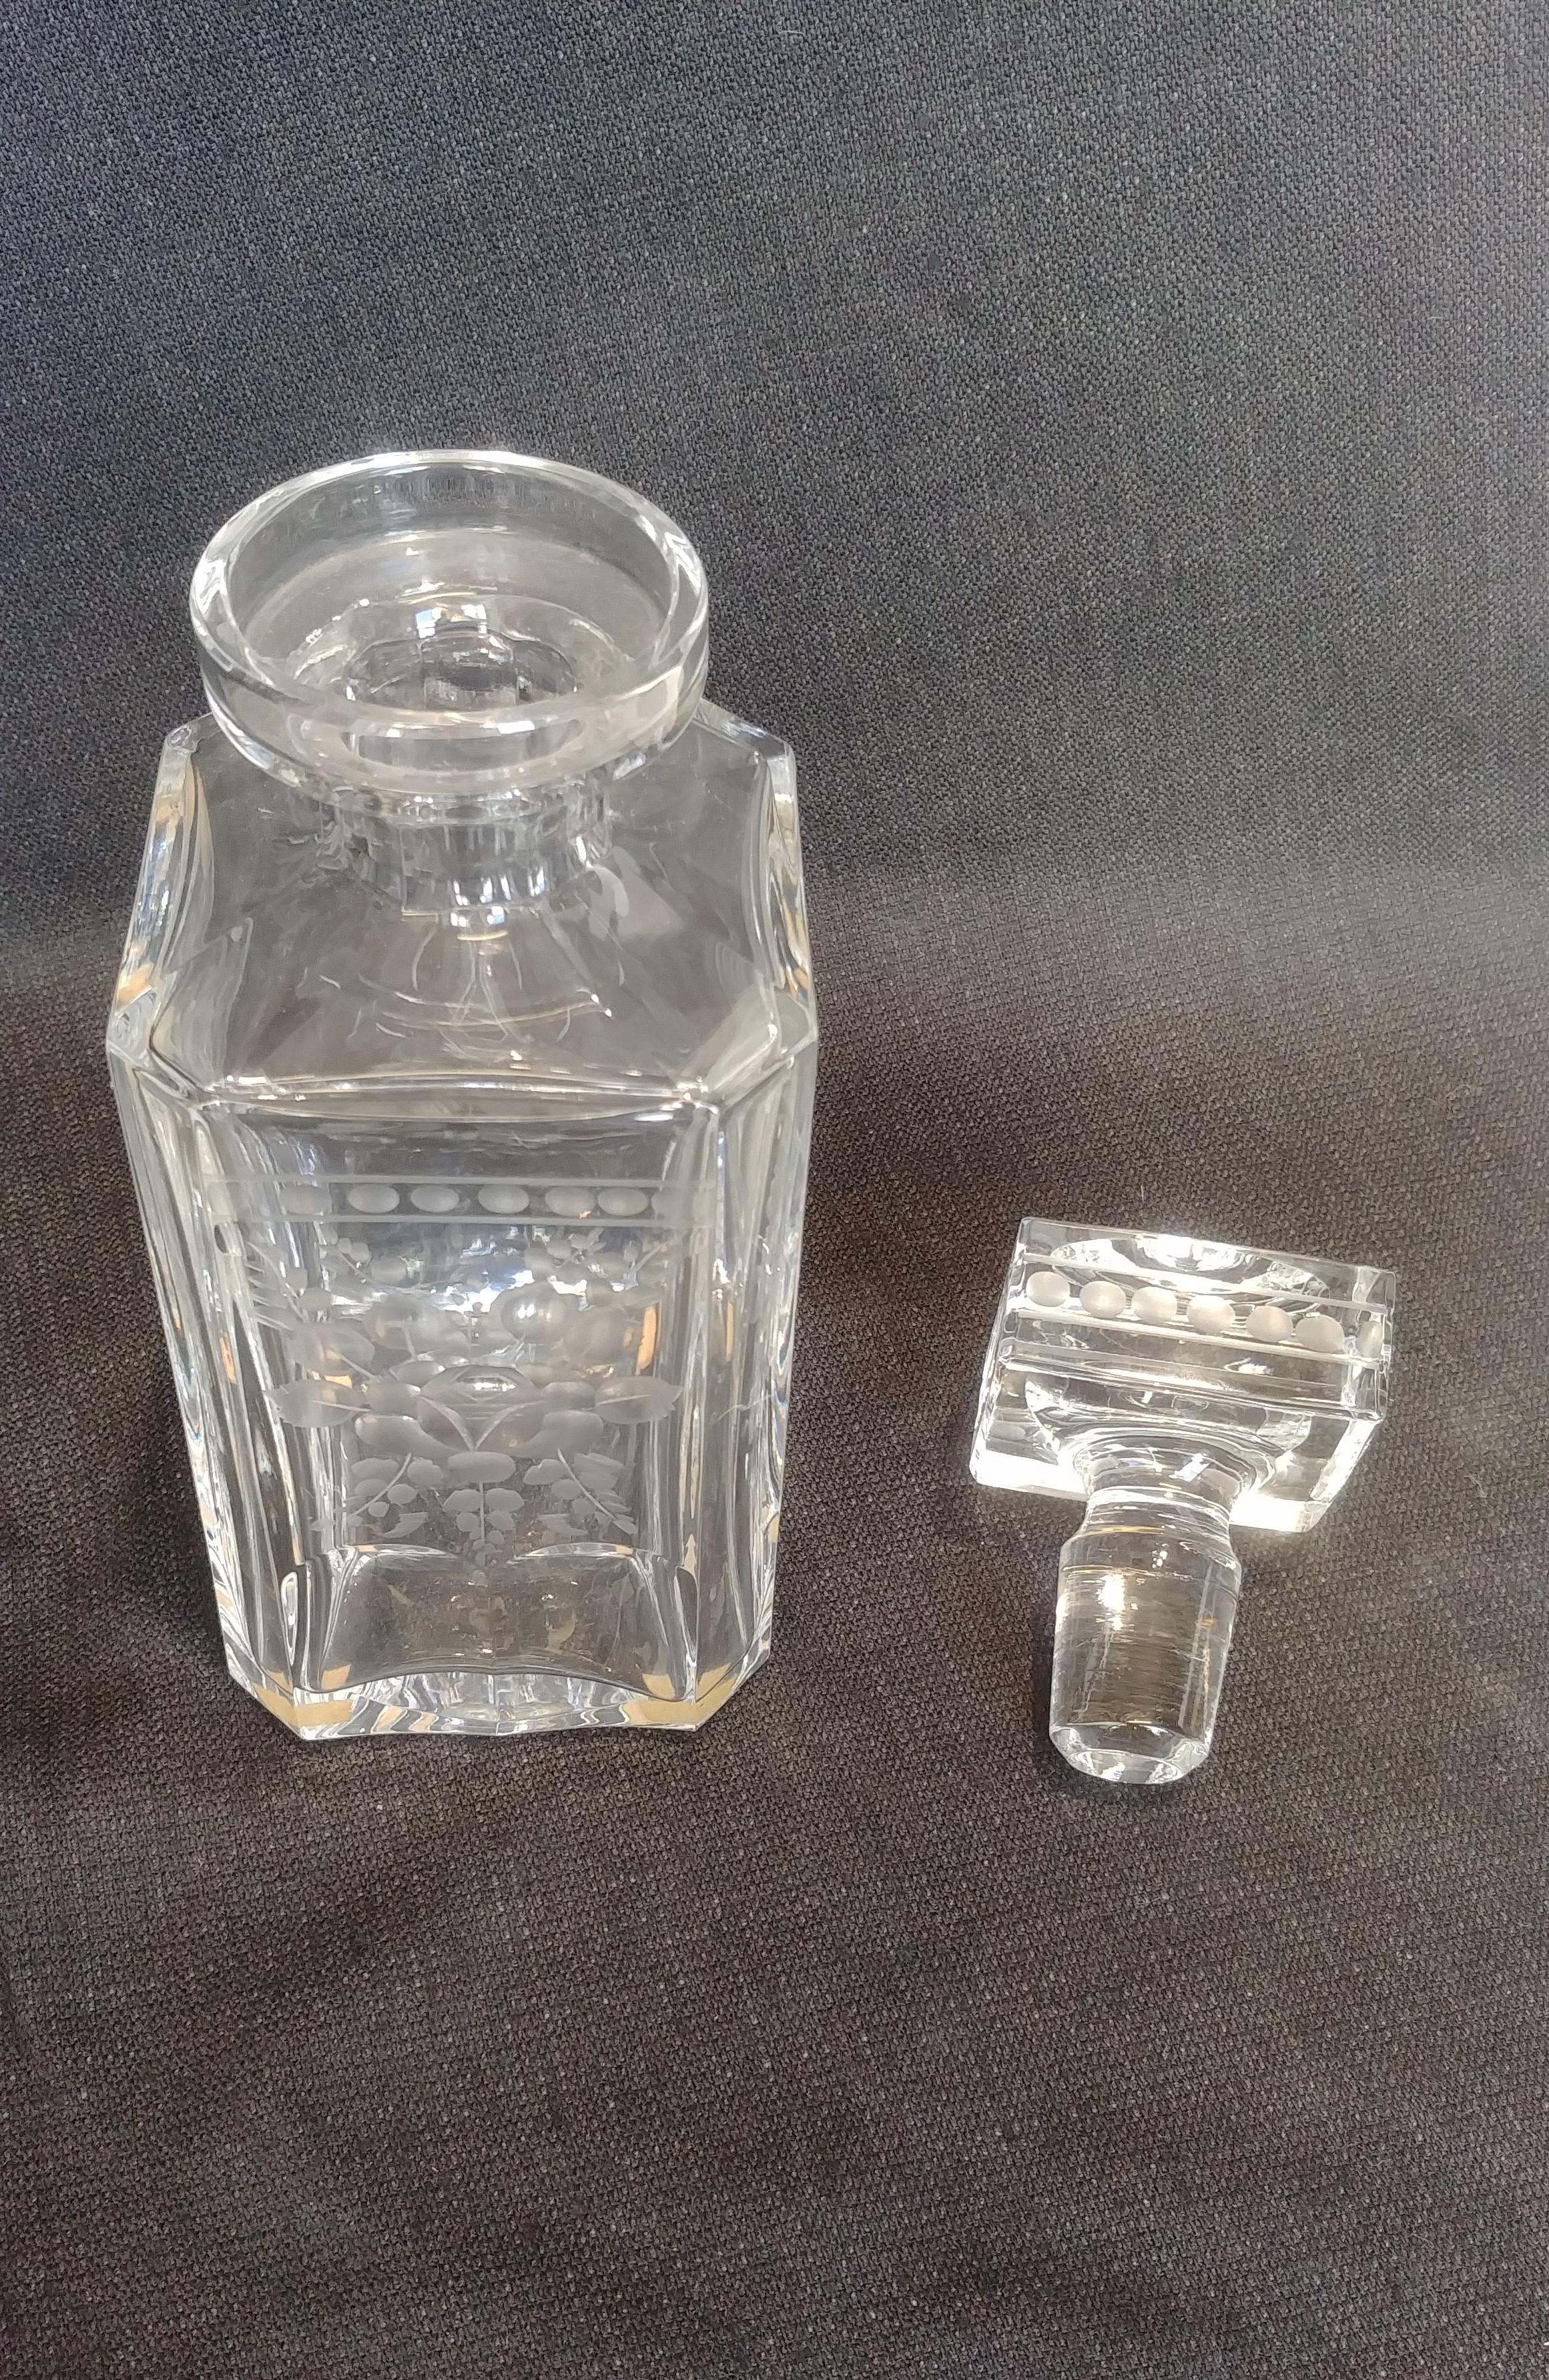 Square bottle for Bavarian liqueurs (Germany) made in the 1950s.
Lead crystal bottle (24% PbO) of high thickness hand-engraved with floral motifs and pods on all sides and complete with cork.
This crystal is characterized by the fact that it